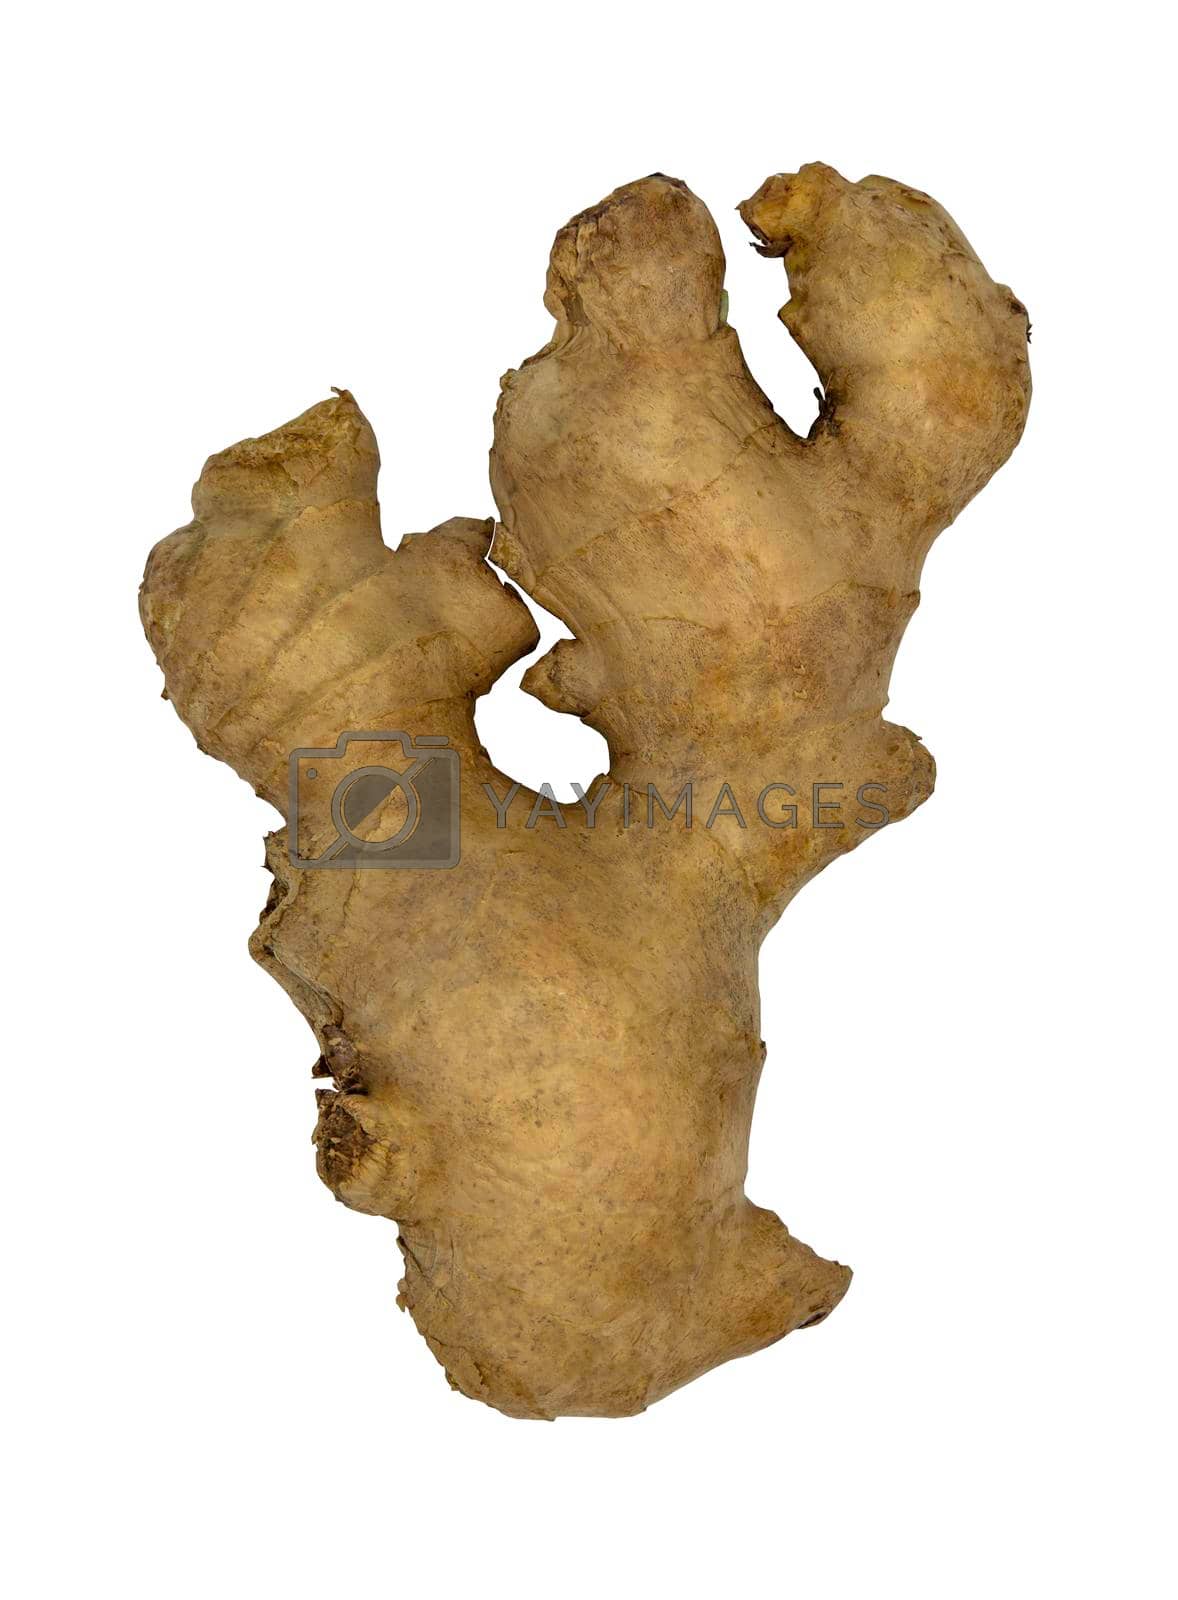 Royalty free image of Fresh ginger rhizome isolated on white background with clipping path. by tosirikul